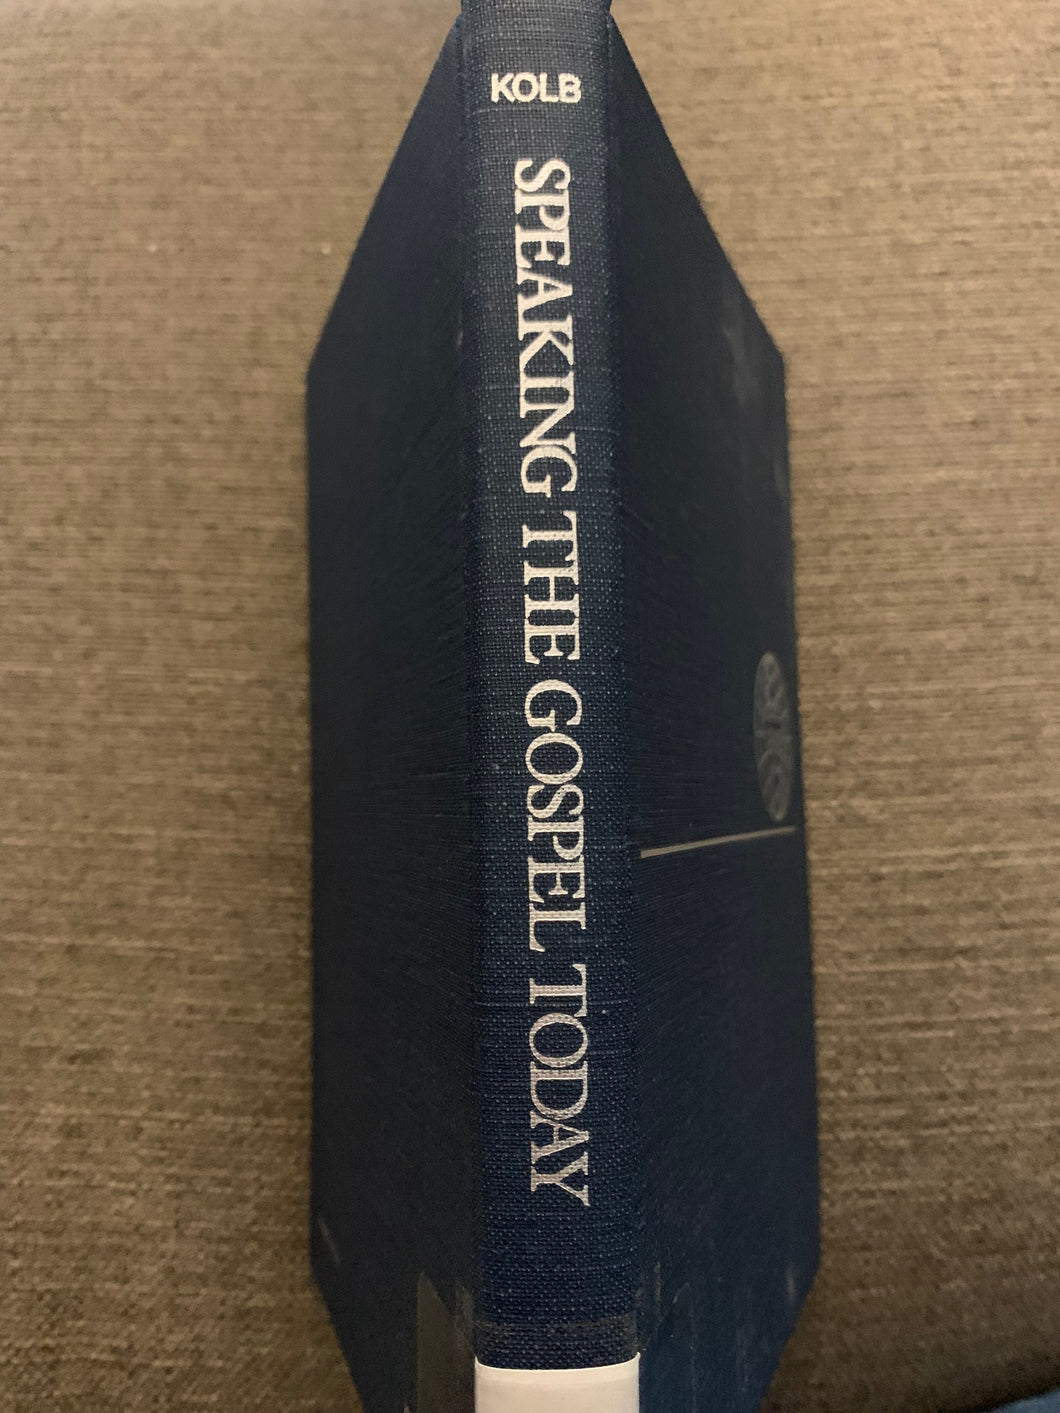 Speaking the Gospel Today: A Theology for Evangelism by Robert A. Kolb